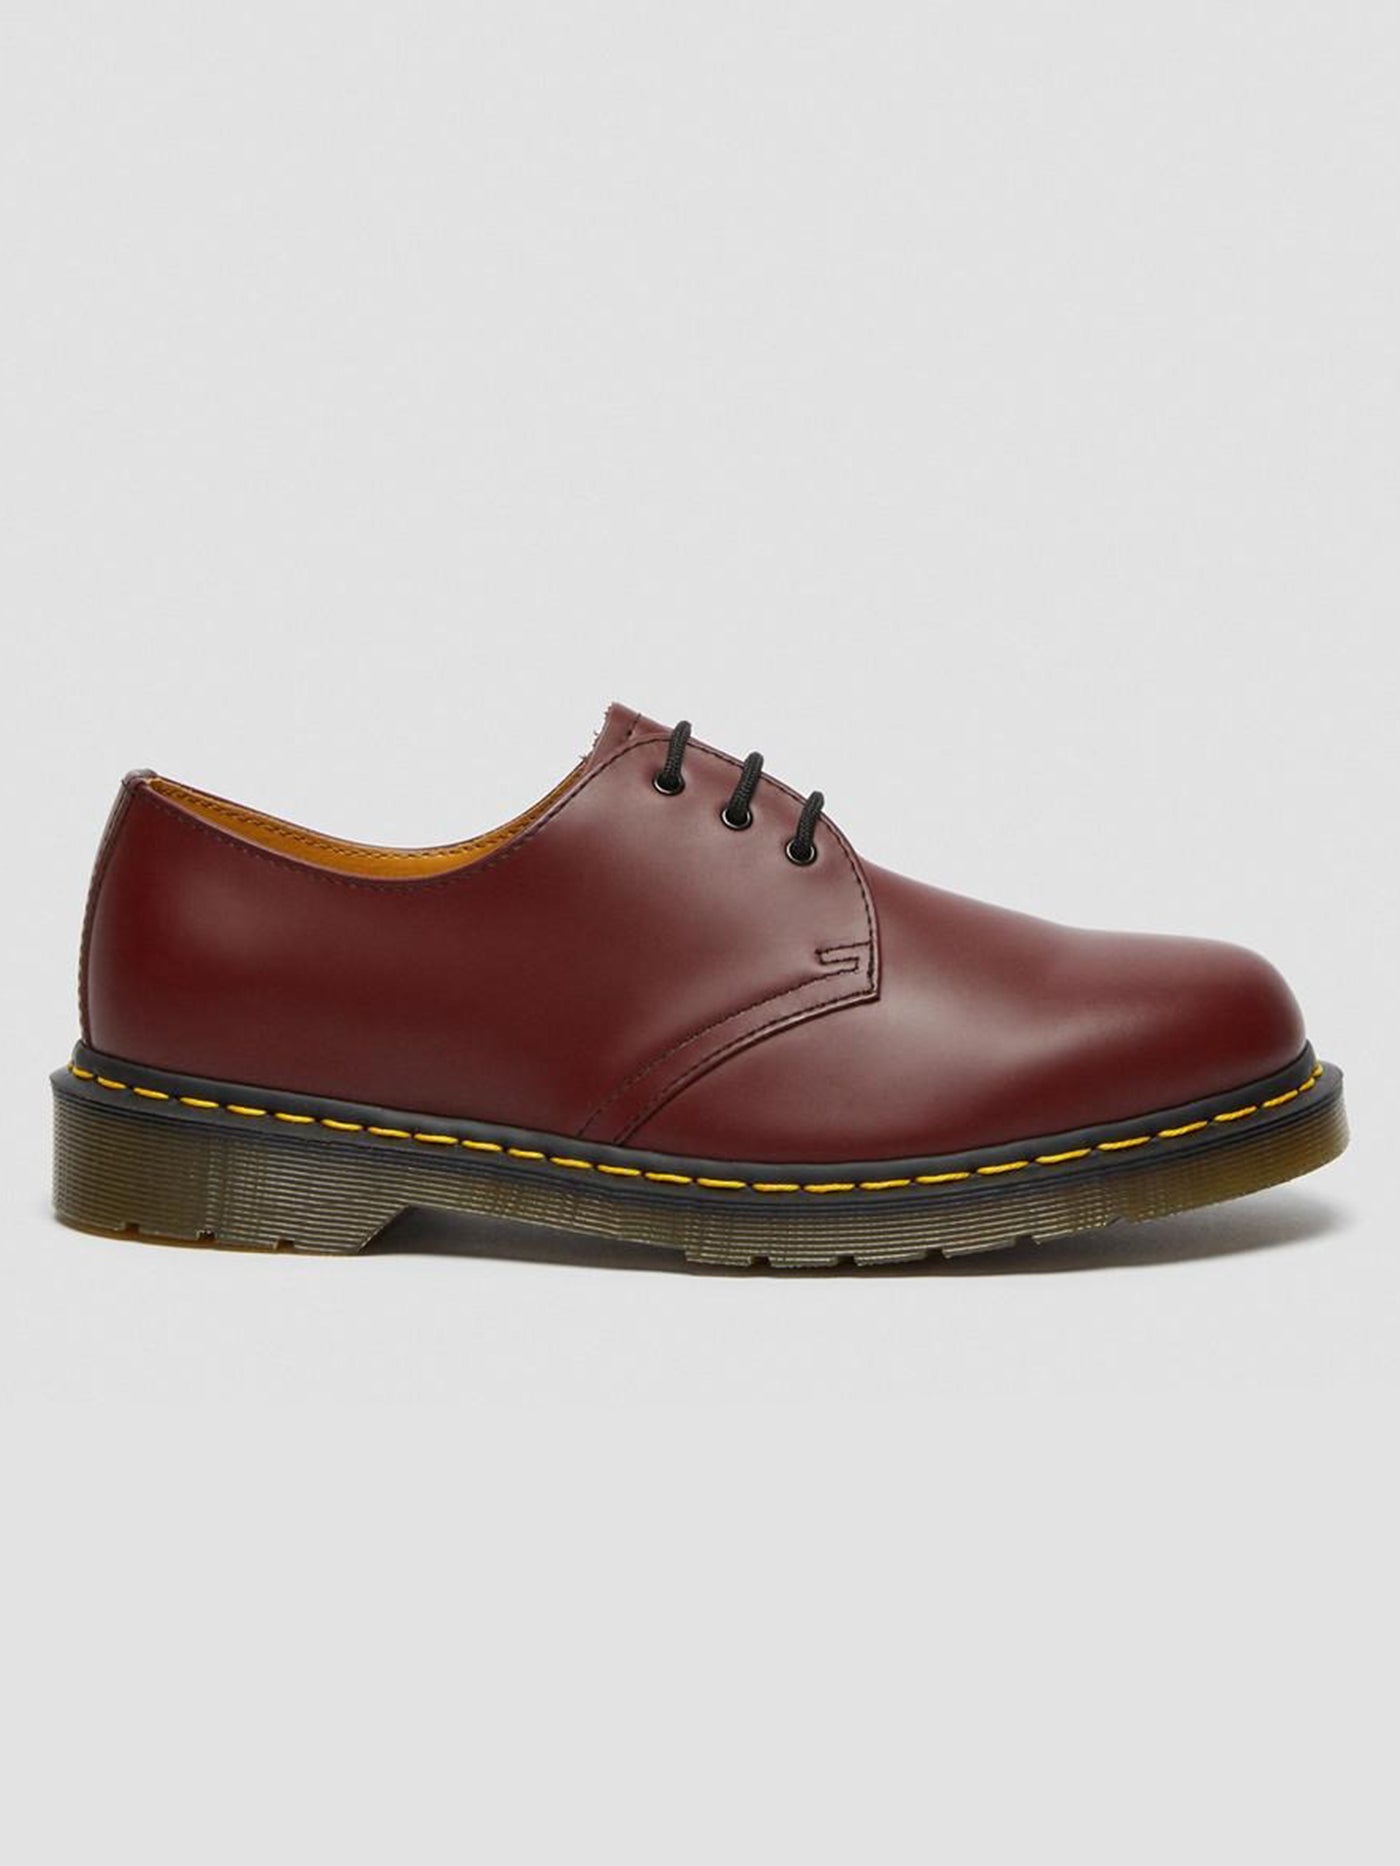 Dr.Martens 1461 Smooth Cherry Red Shoes